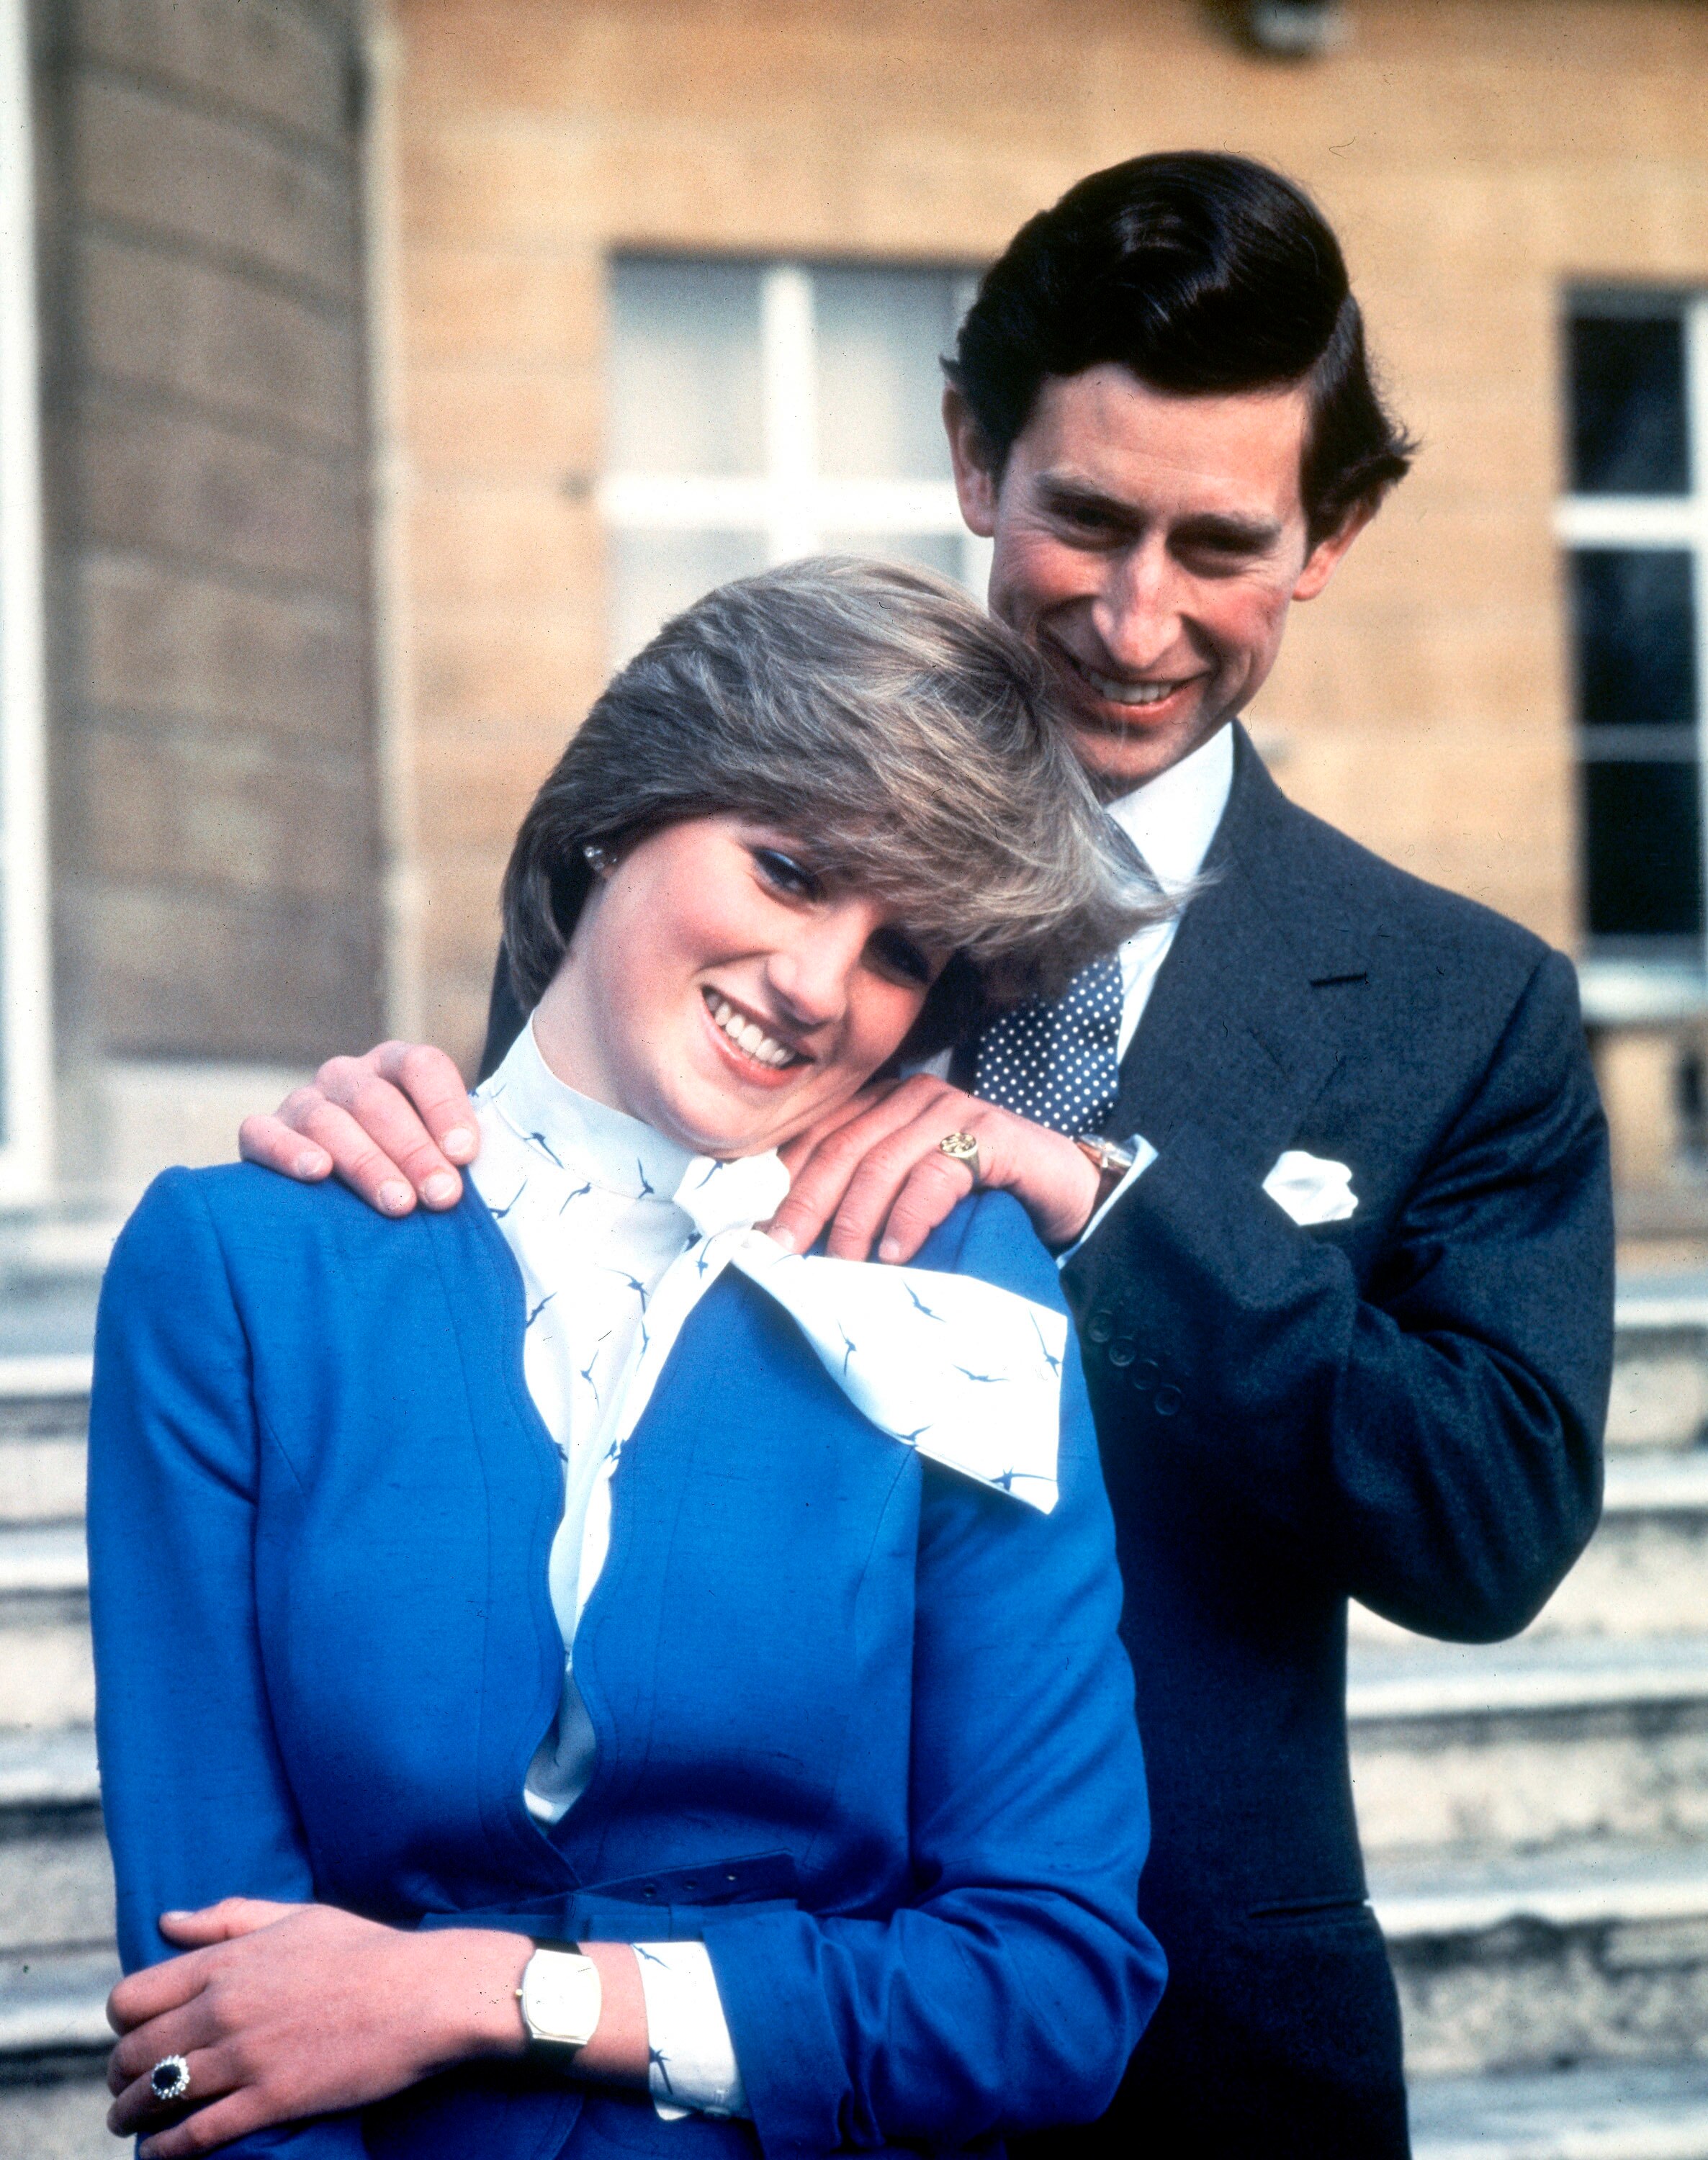 A young Princess Diana wears a cobalt blue suit with a white and blue scarf, while Prince Charles wears a suit.